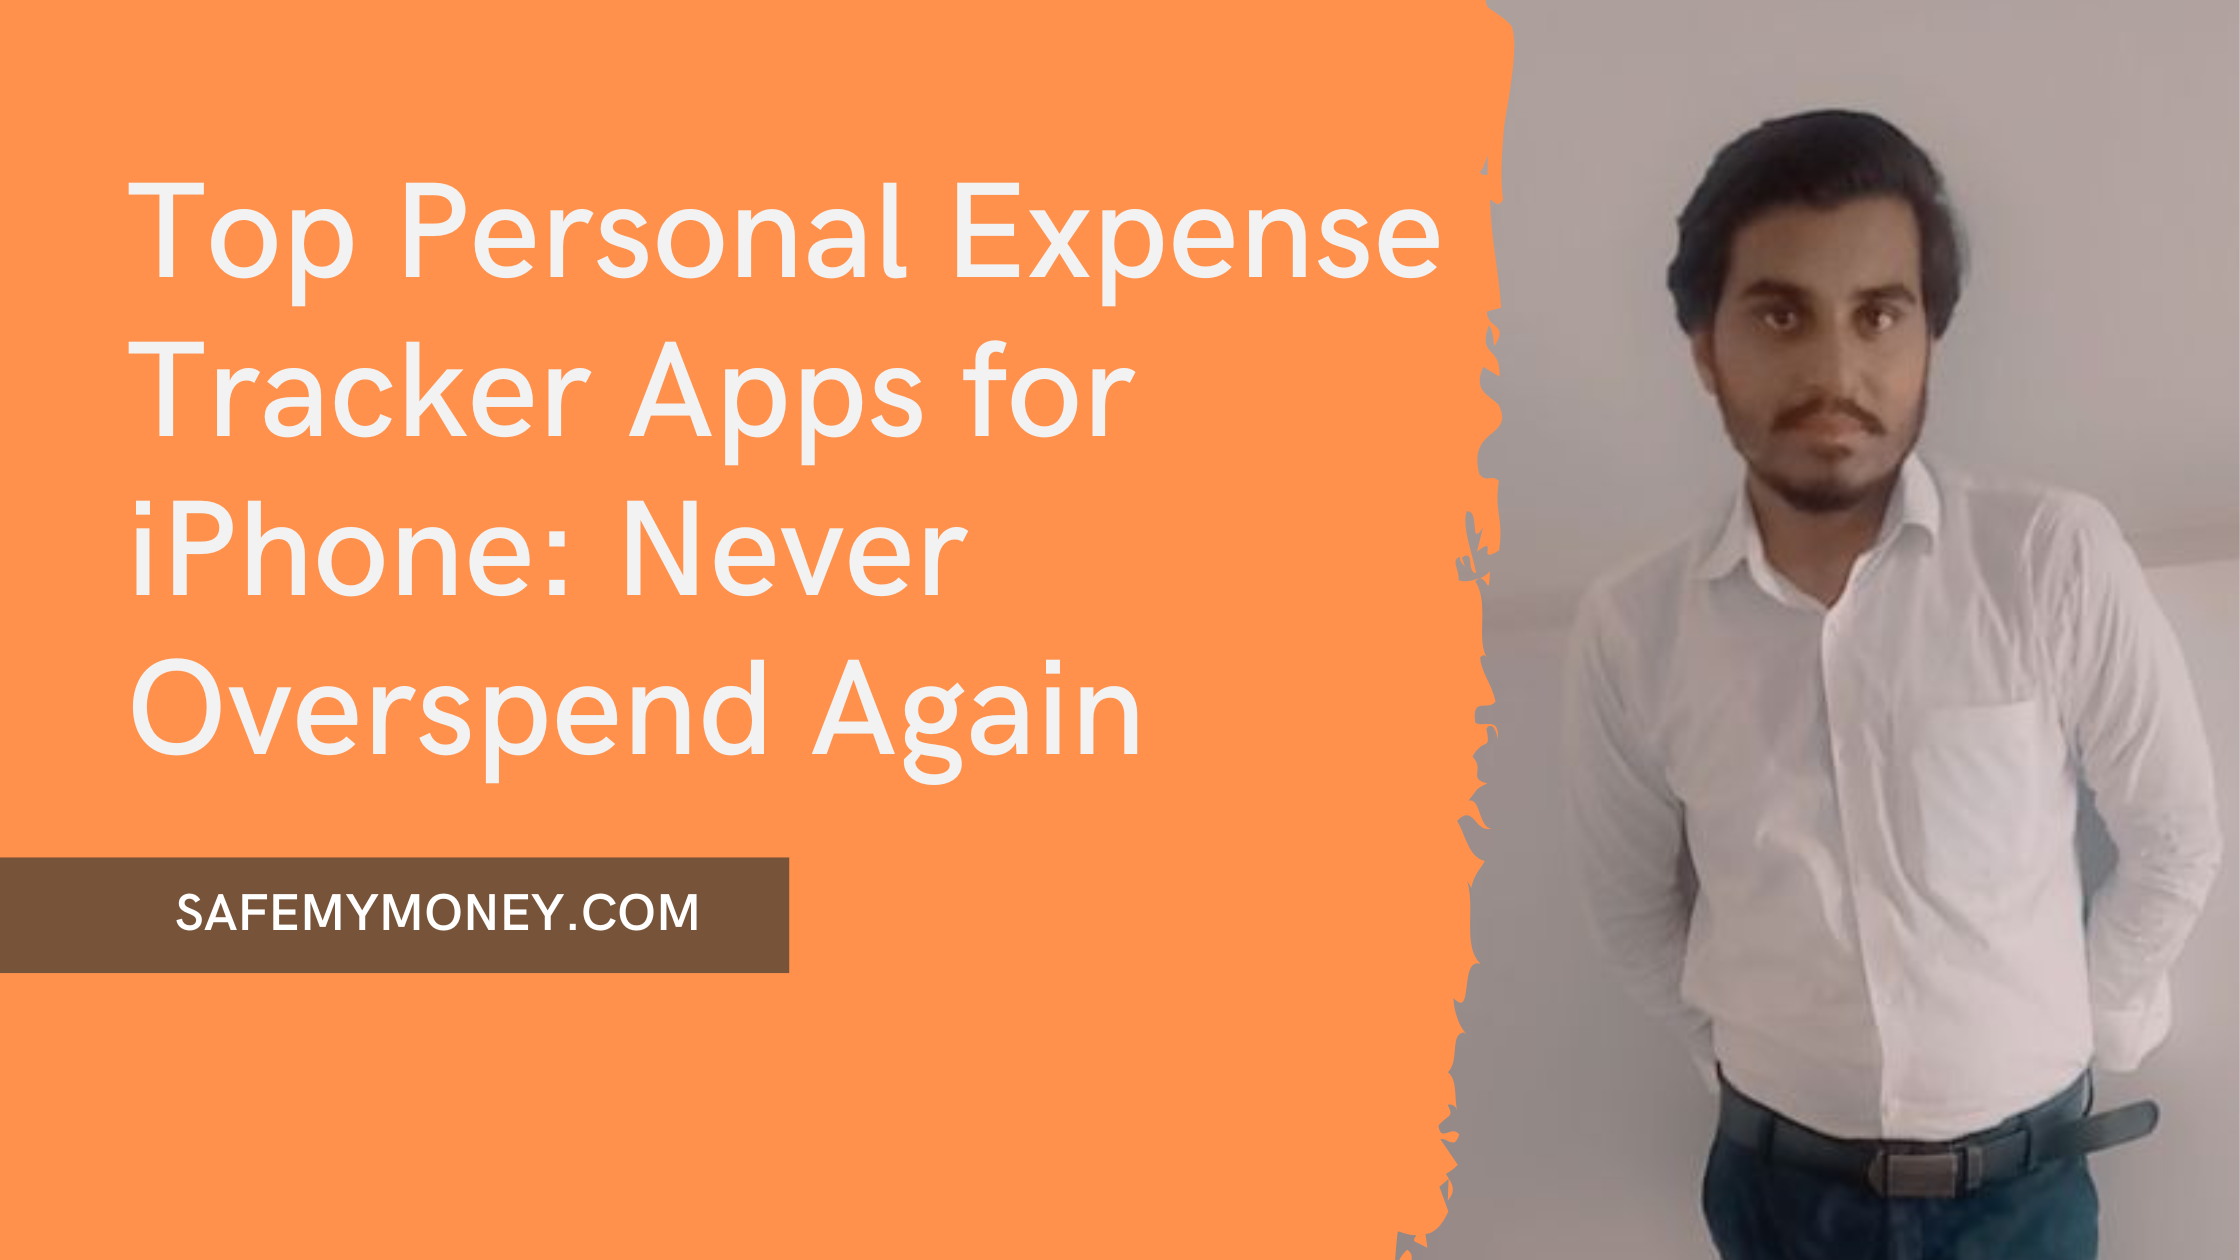 Top Personal Expense Tracker Apps for iPhone Never Overspend Again